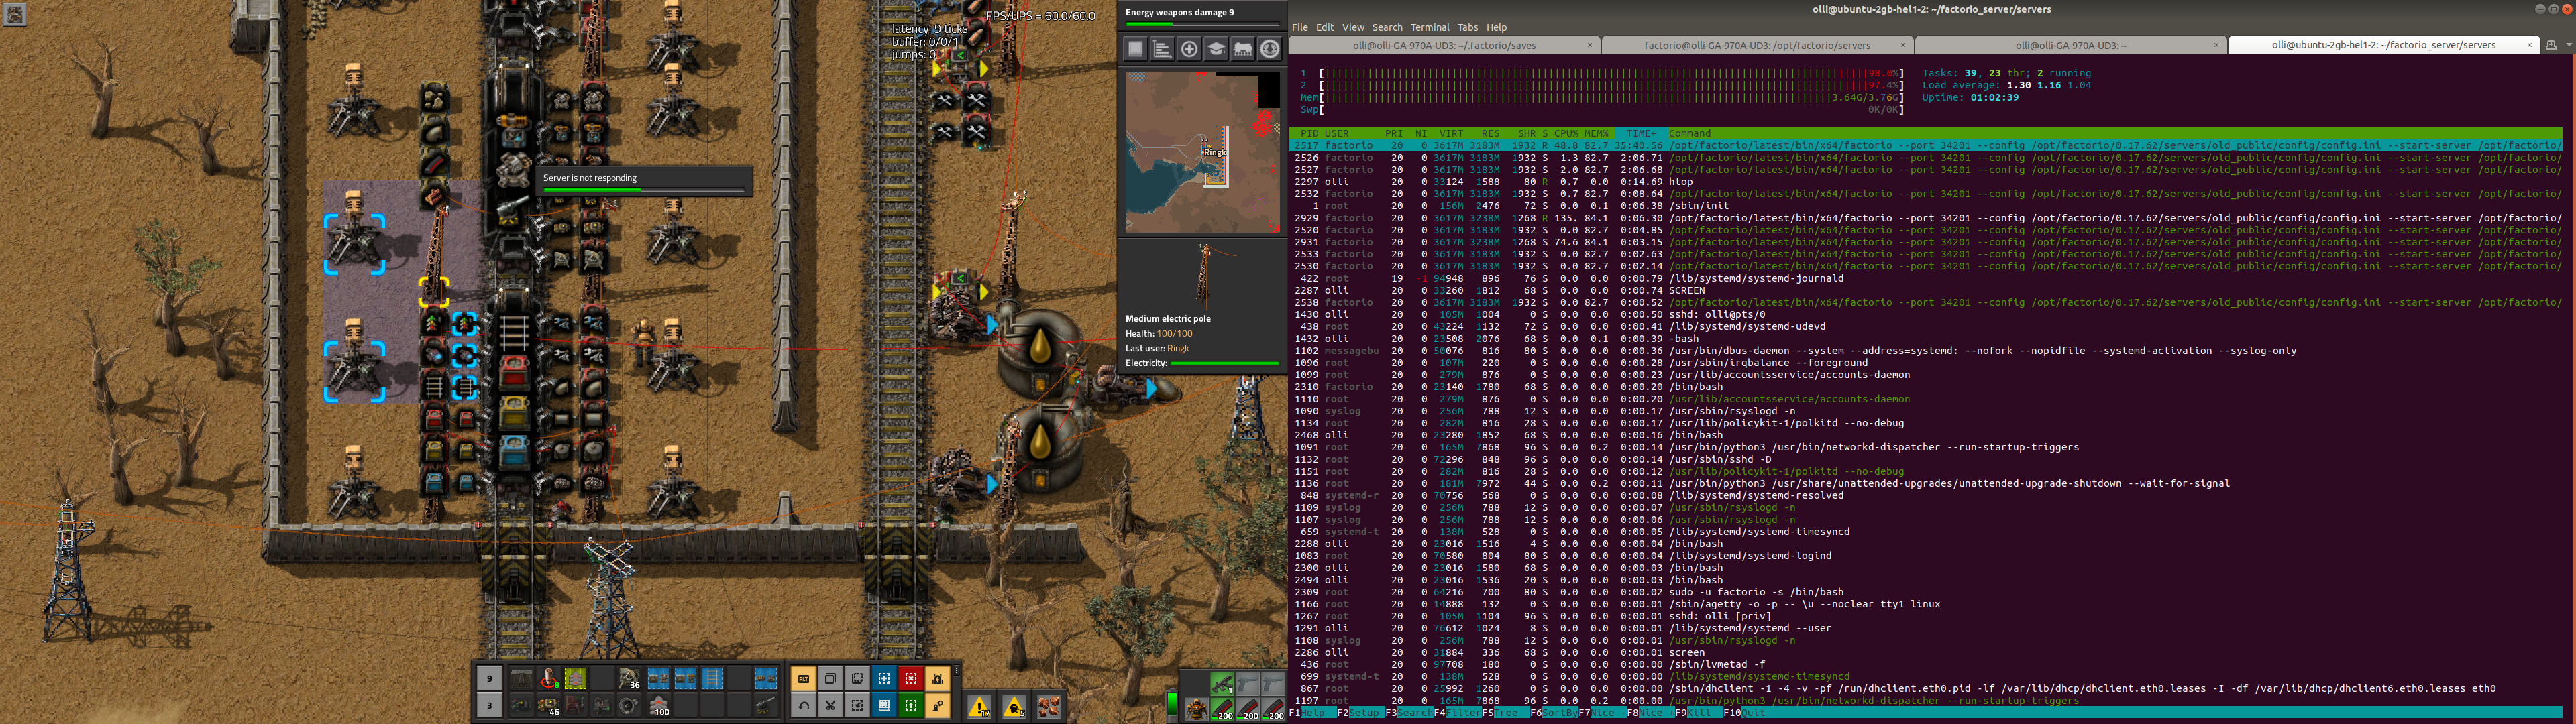 Second time the factorio server stopped responding. Had htop on other display.